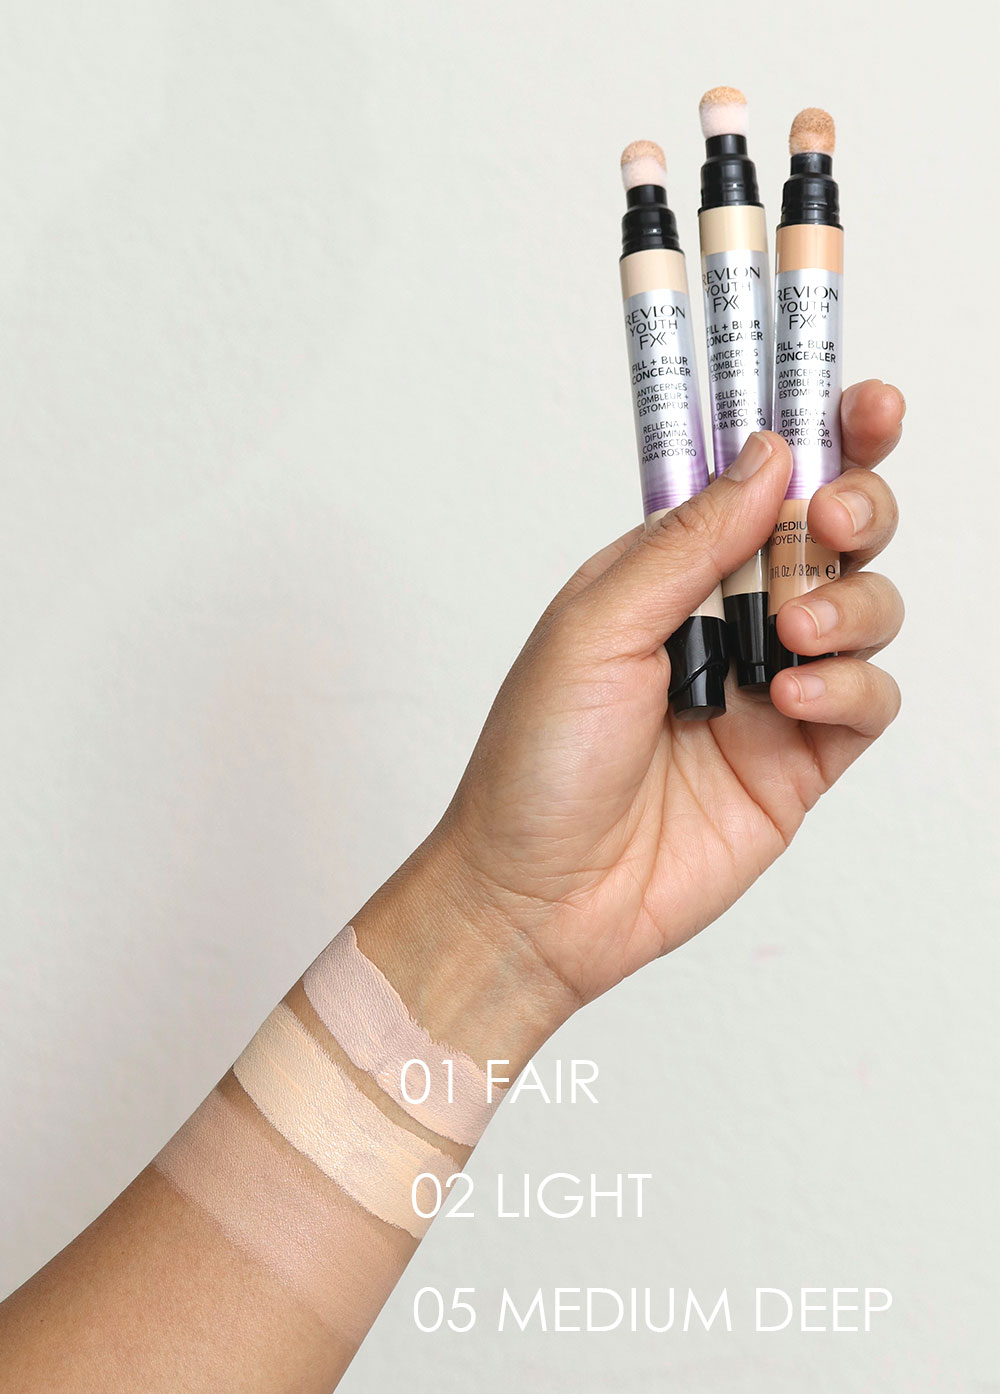 revlon youth fx fill and blur concealer review